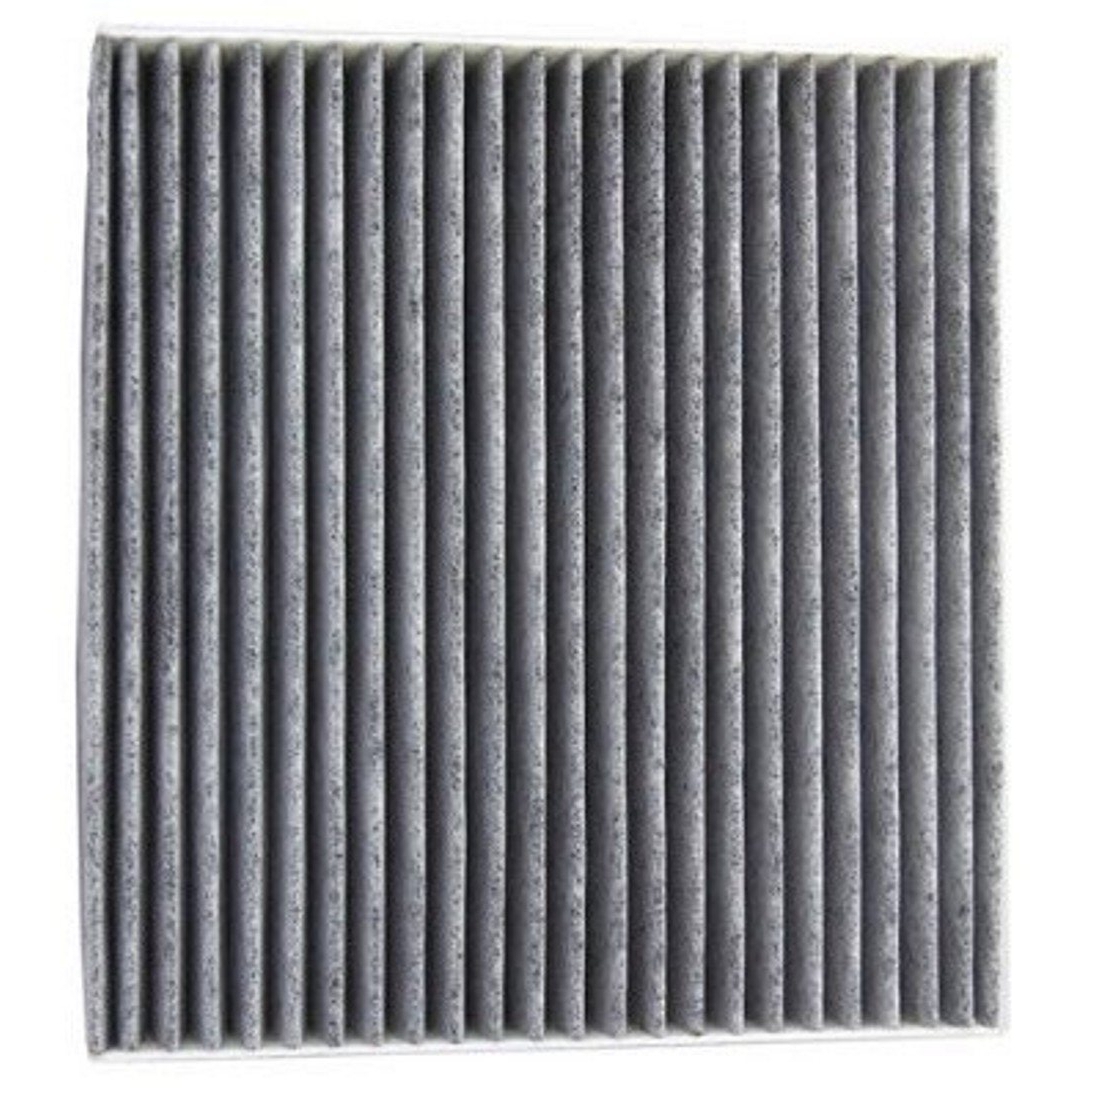 HQRP Activated Carbon / Charcoal Air Cabin Filter for Toyota Camry Hybrid 2007 2008 2009 2010 2009 Toyota Camry Hybrid Cabin Air Filter